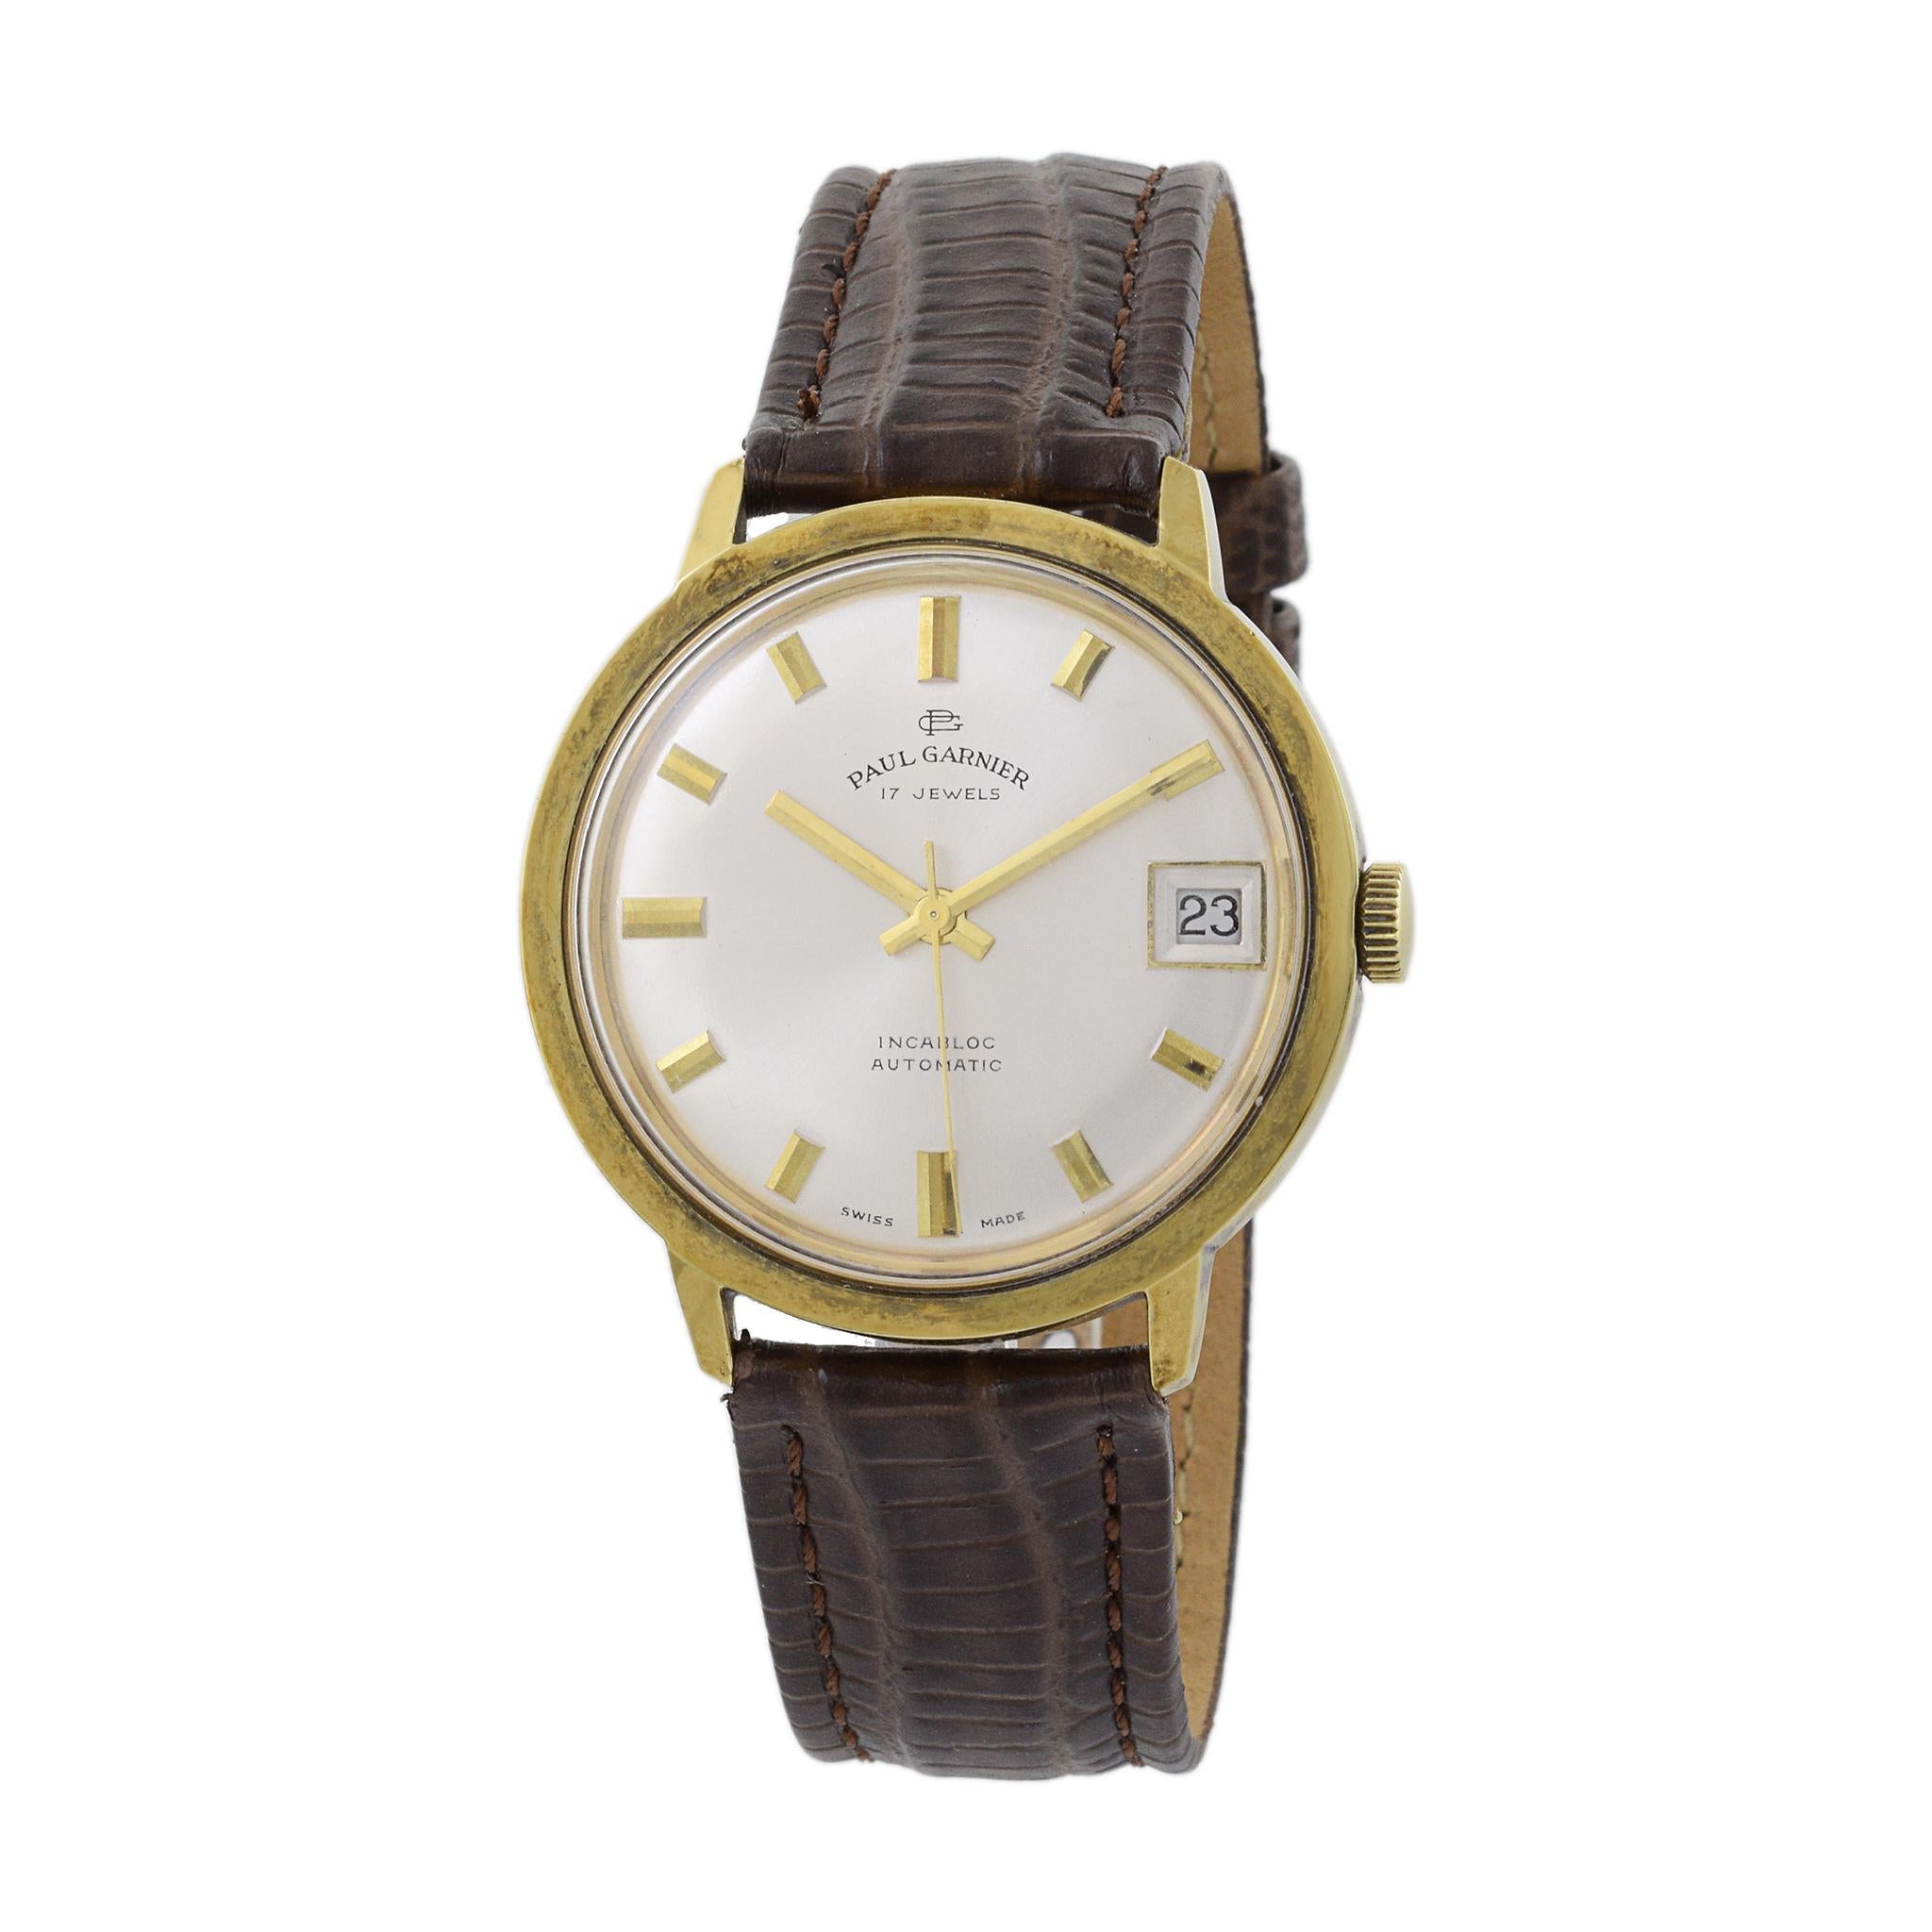 This is a 1970's Paul Garnier automatic calatrava. This watch is powered by a 17 jewel automatic Felsa caliber 4462 movement. This Paul Garnier features a date function at 9 o'clock.

The case of this watch measures 35mm and is a screwback